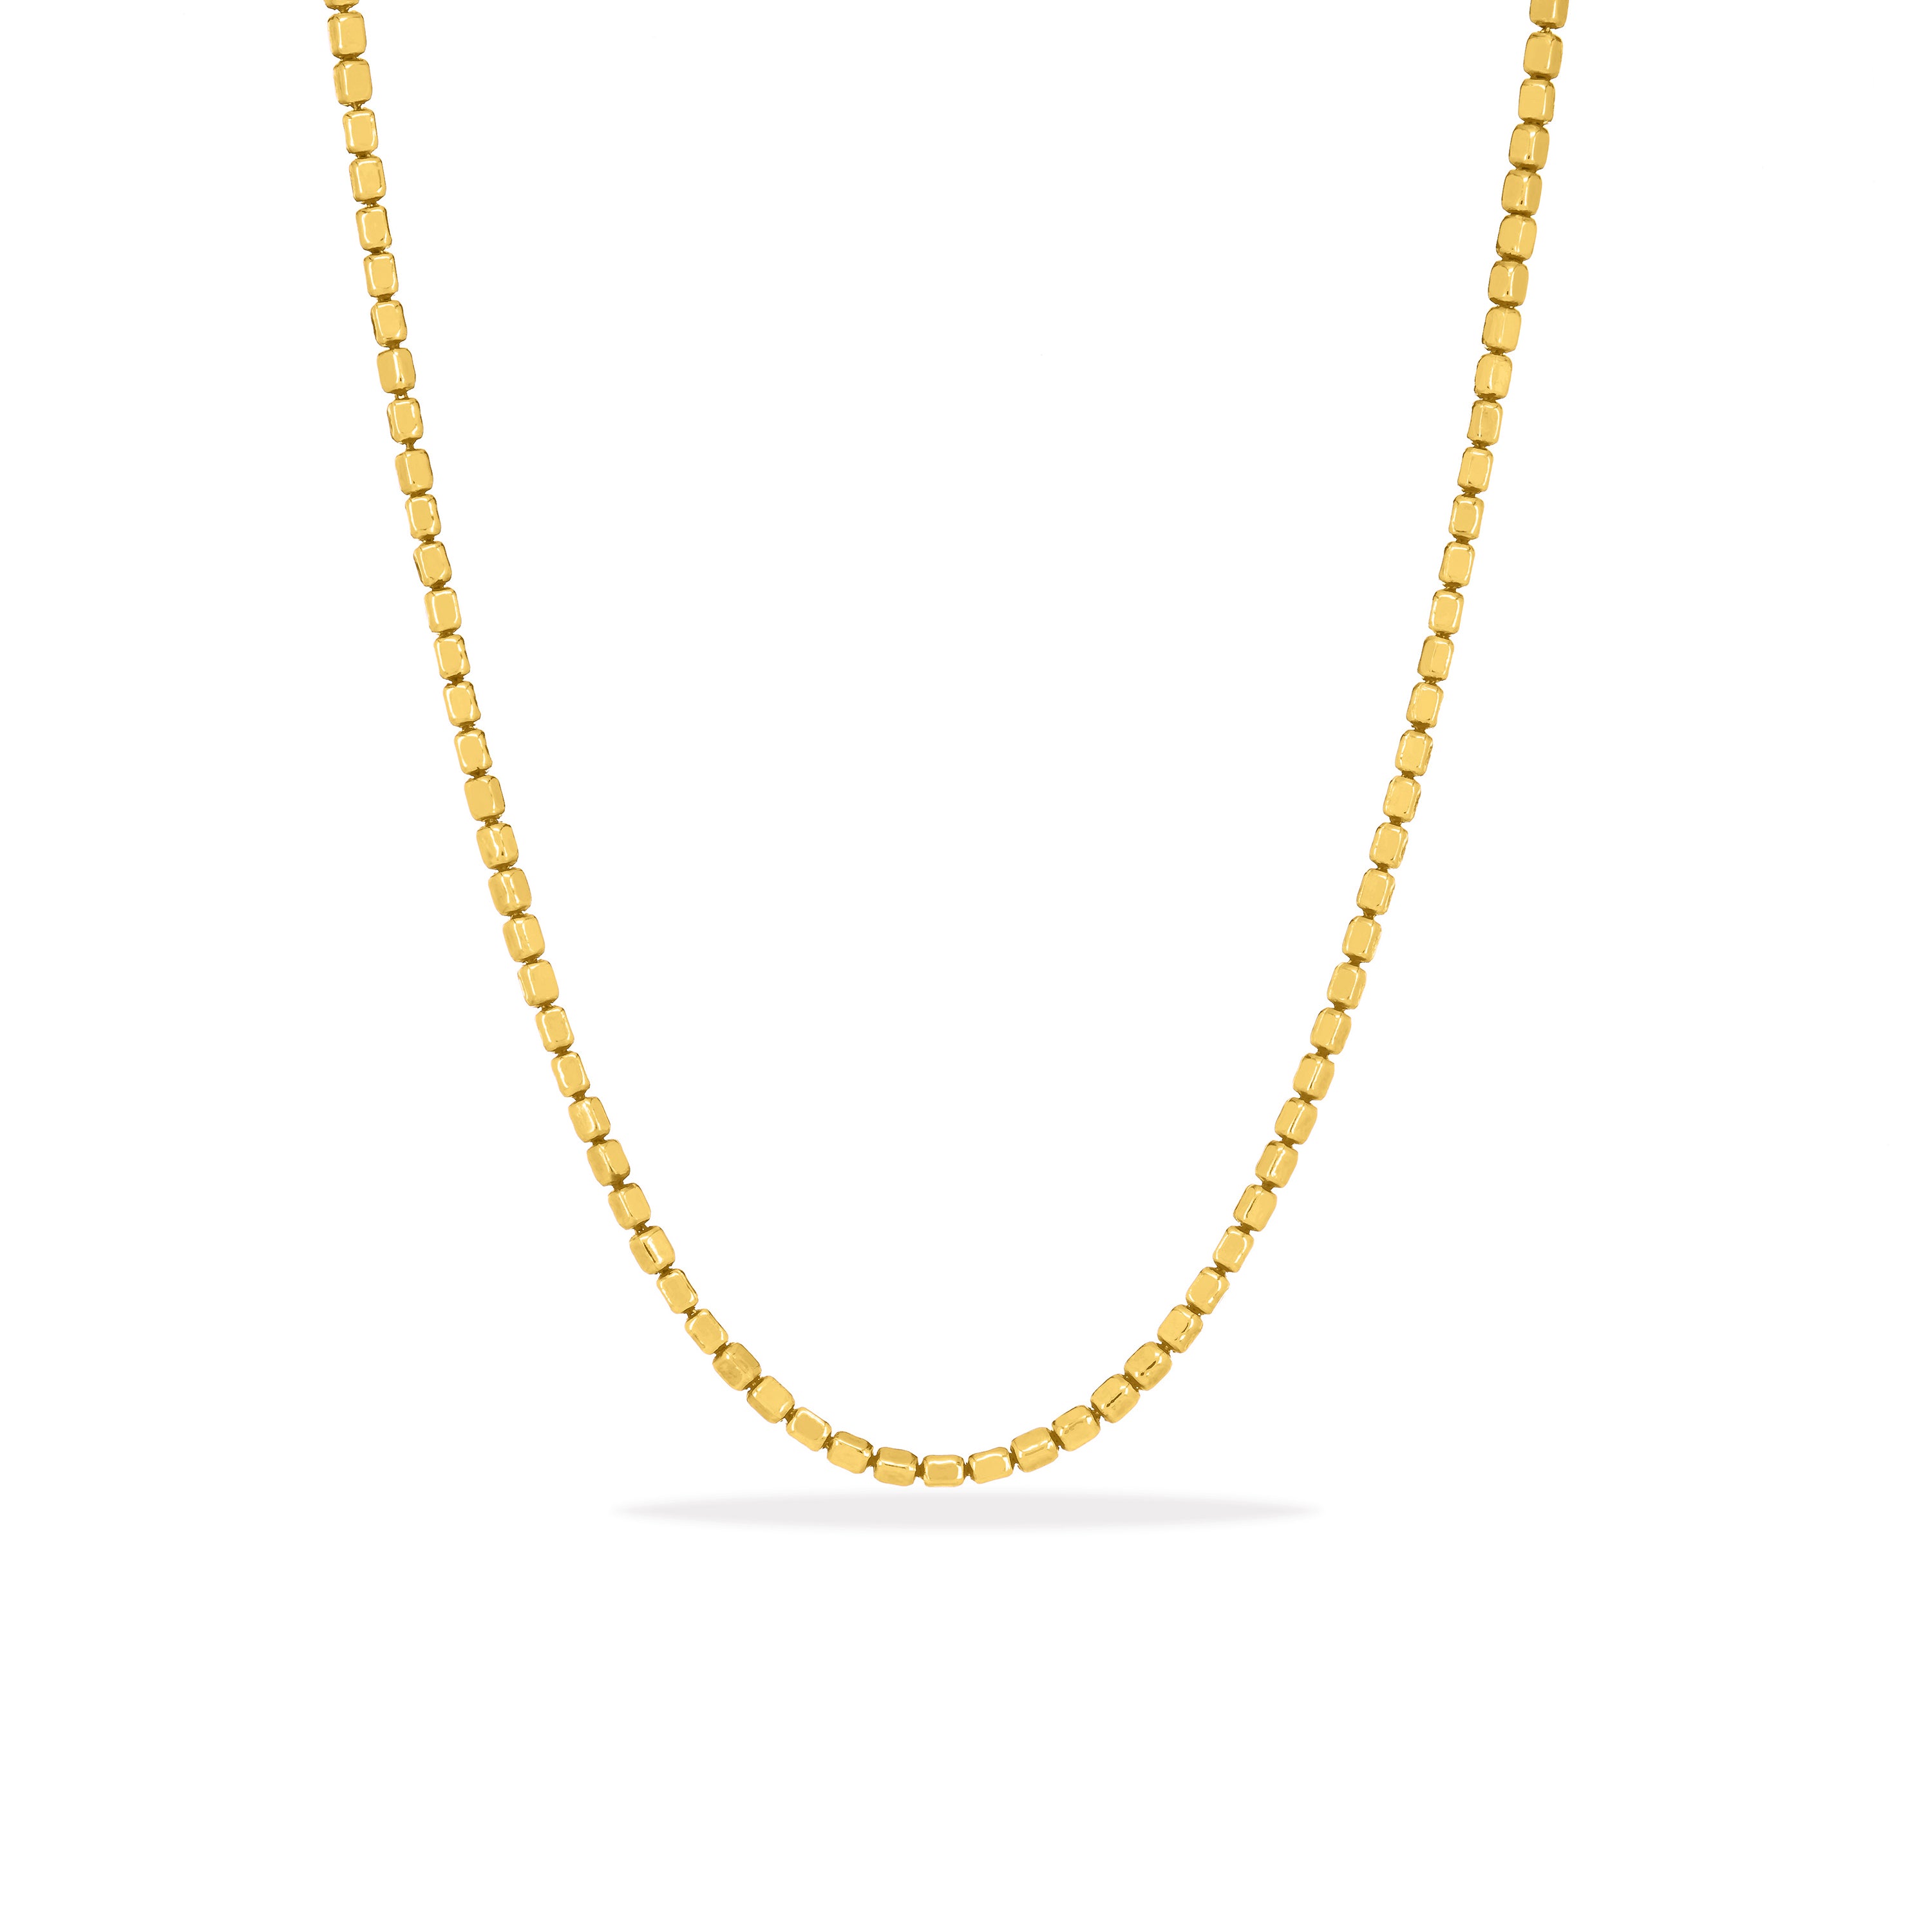 Thin Dainty Block Chain Necklace